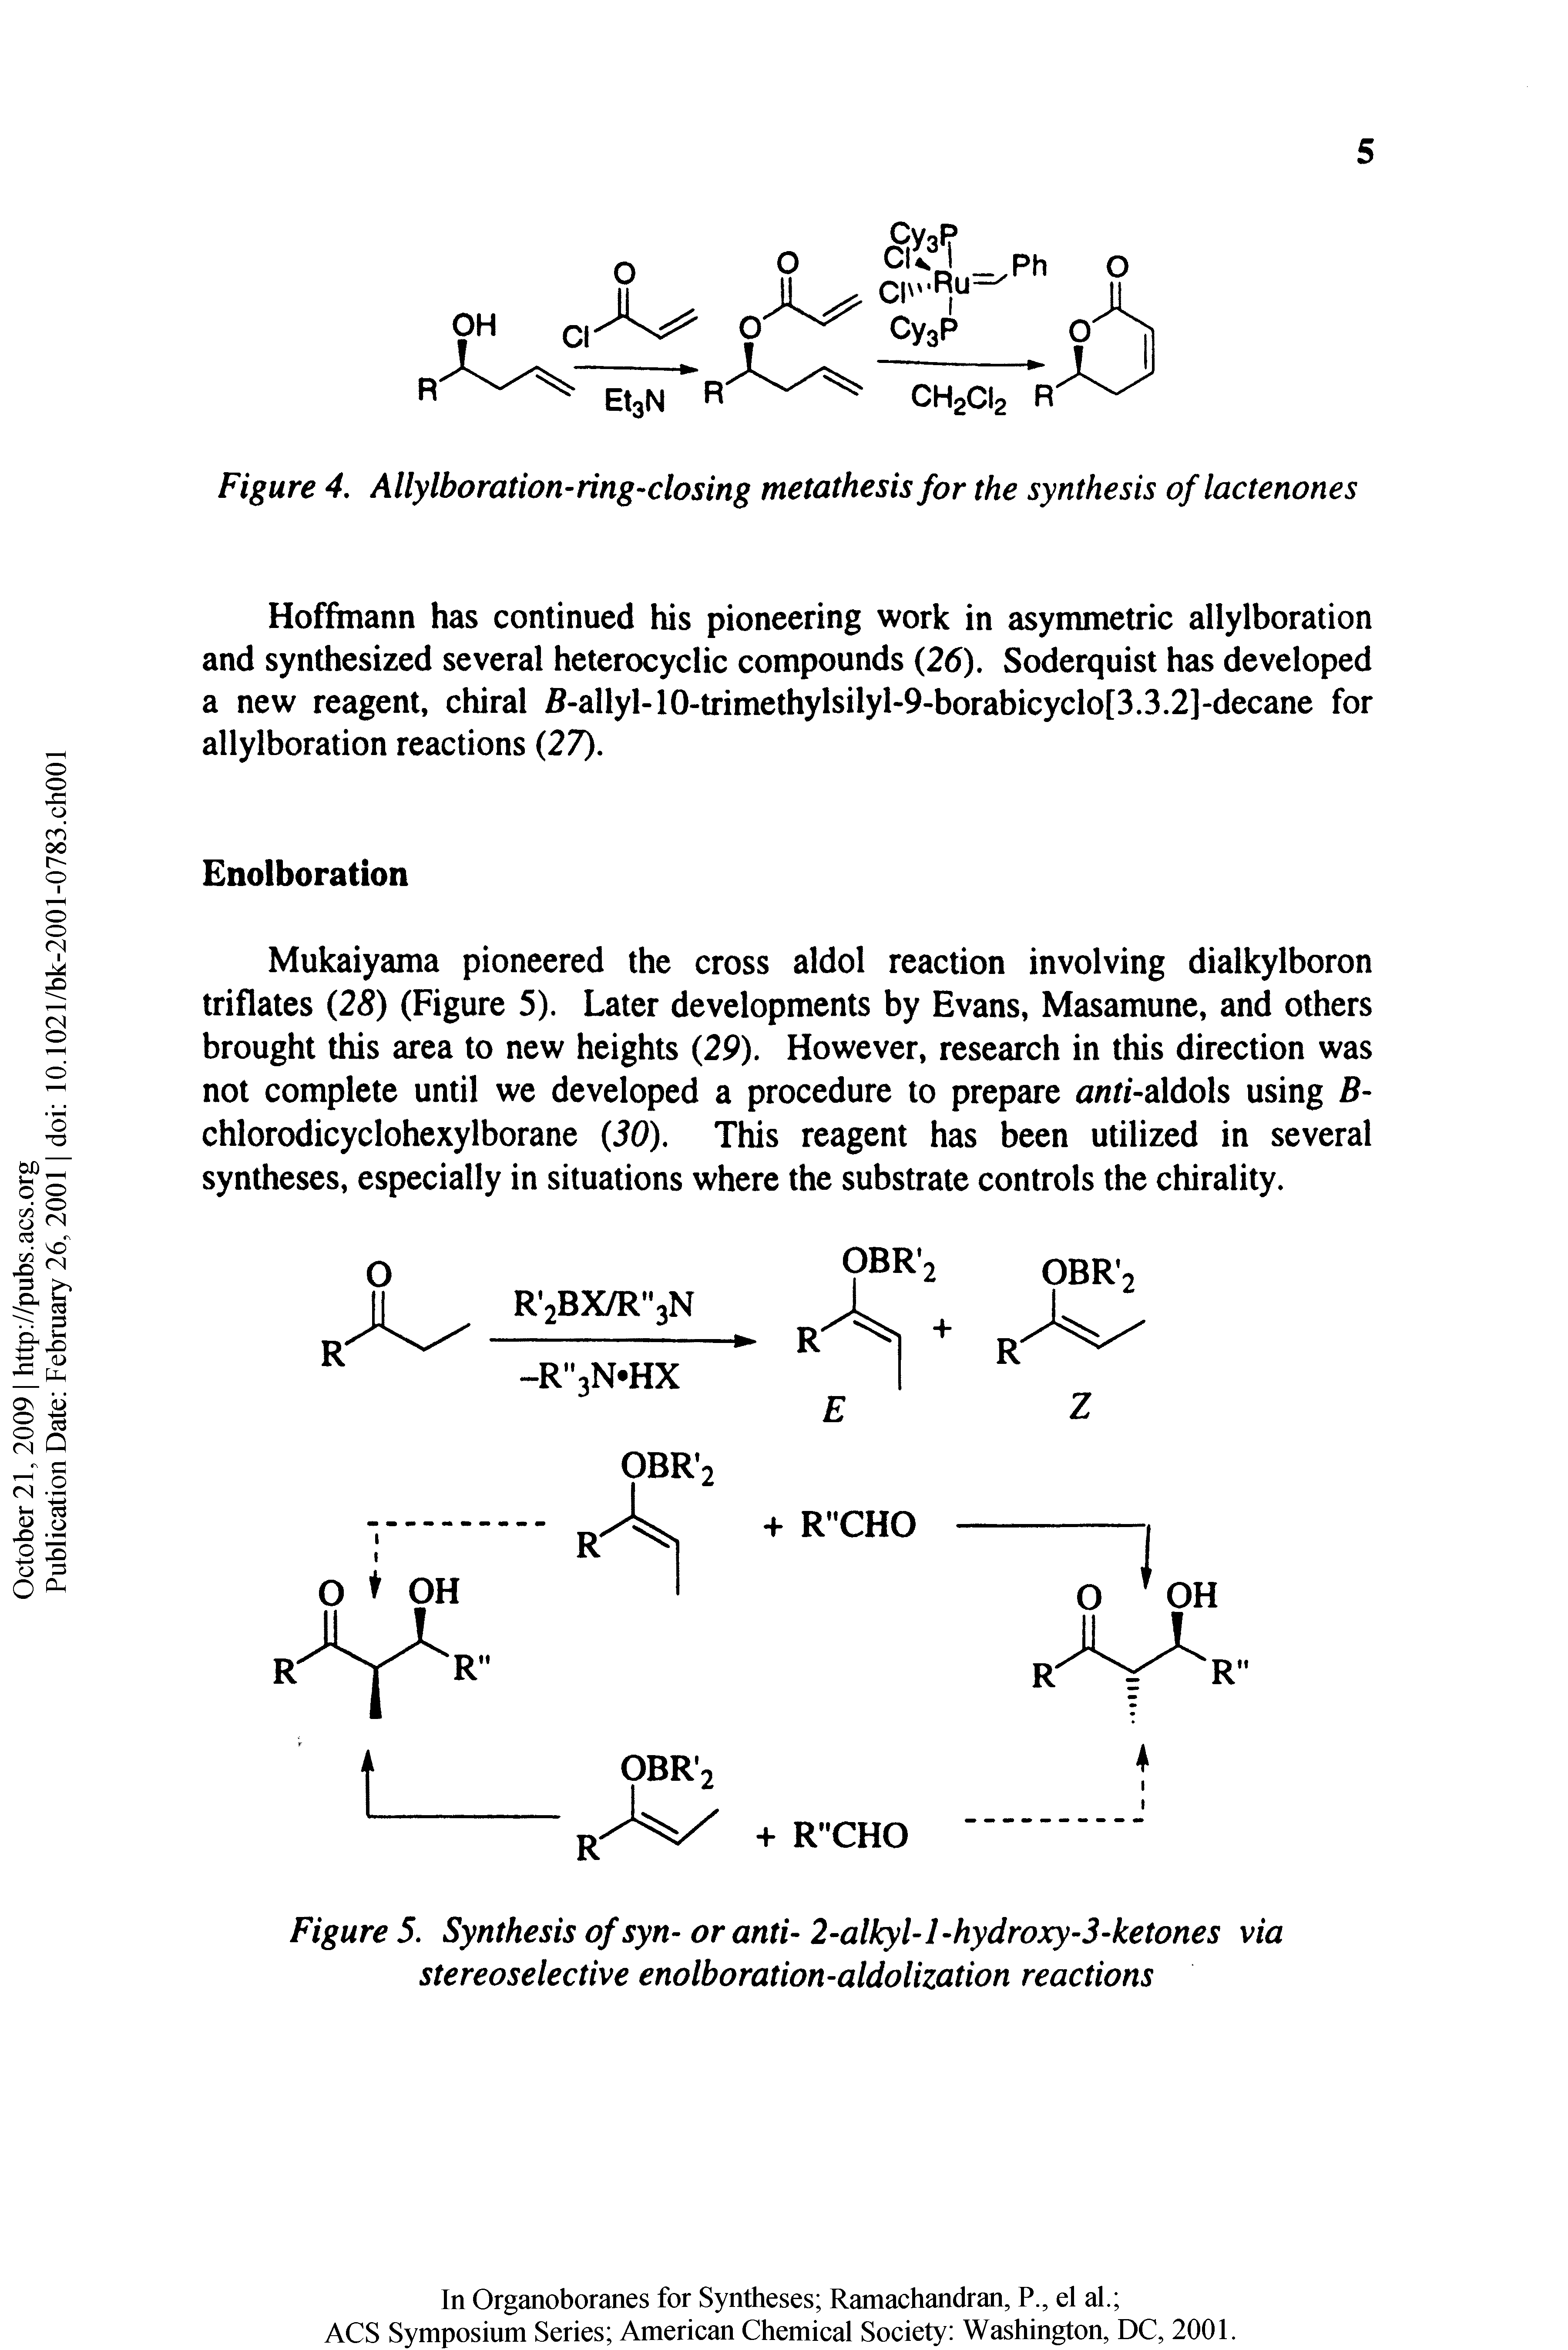 Figure 5. Synthesis ofsyn- or anti- 2-alkyUI-hydroxy-3-ketones via stereoselective enolboration-aldolization reactions...